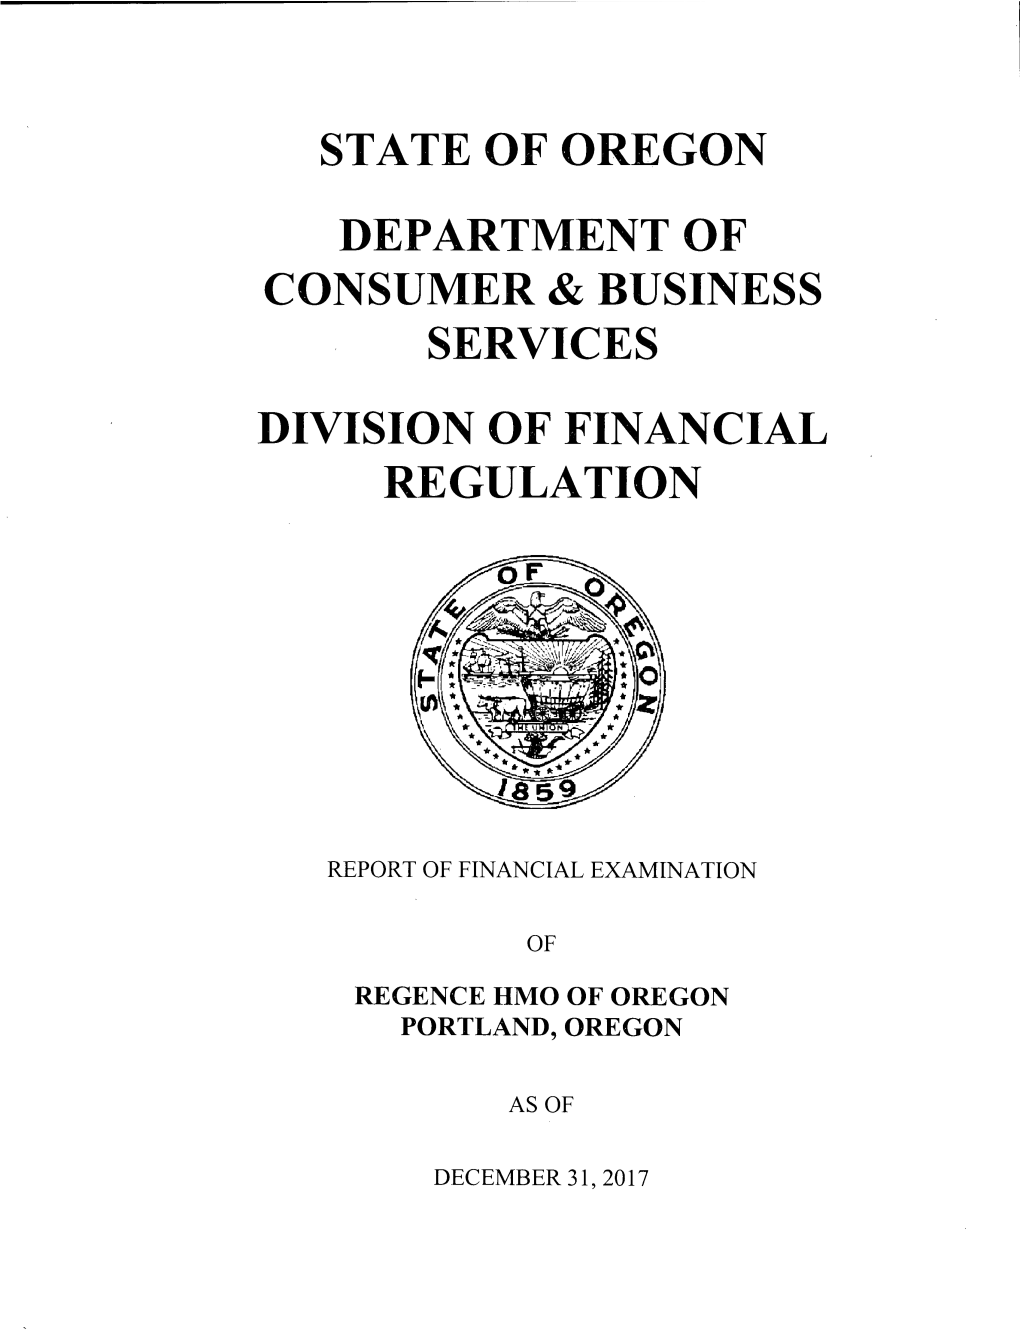 Report of Financial Examination of Regence HMO Oregon, As Of